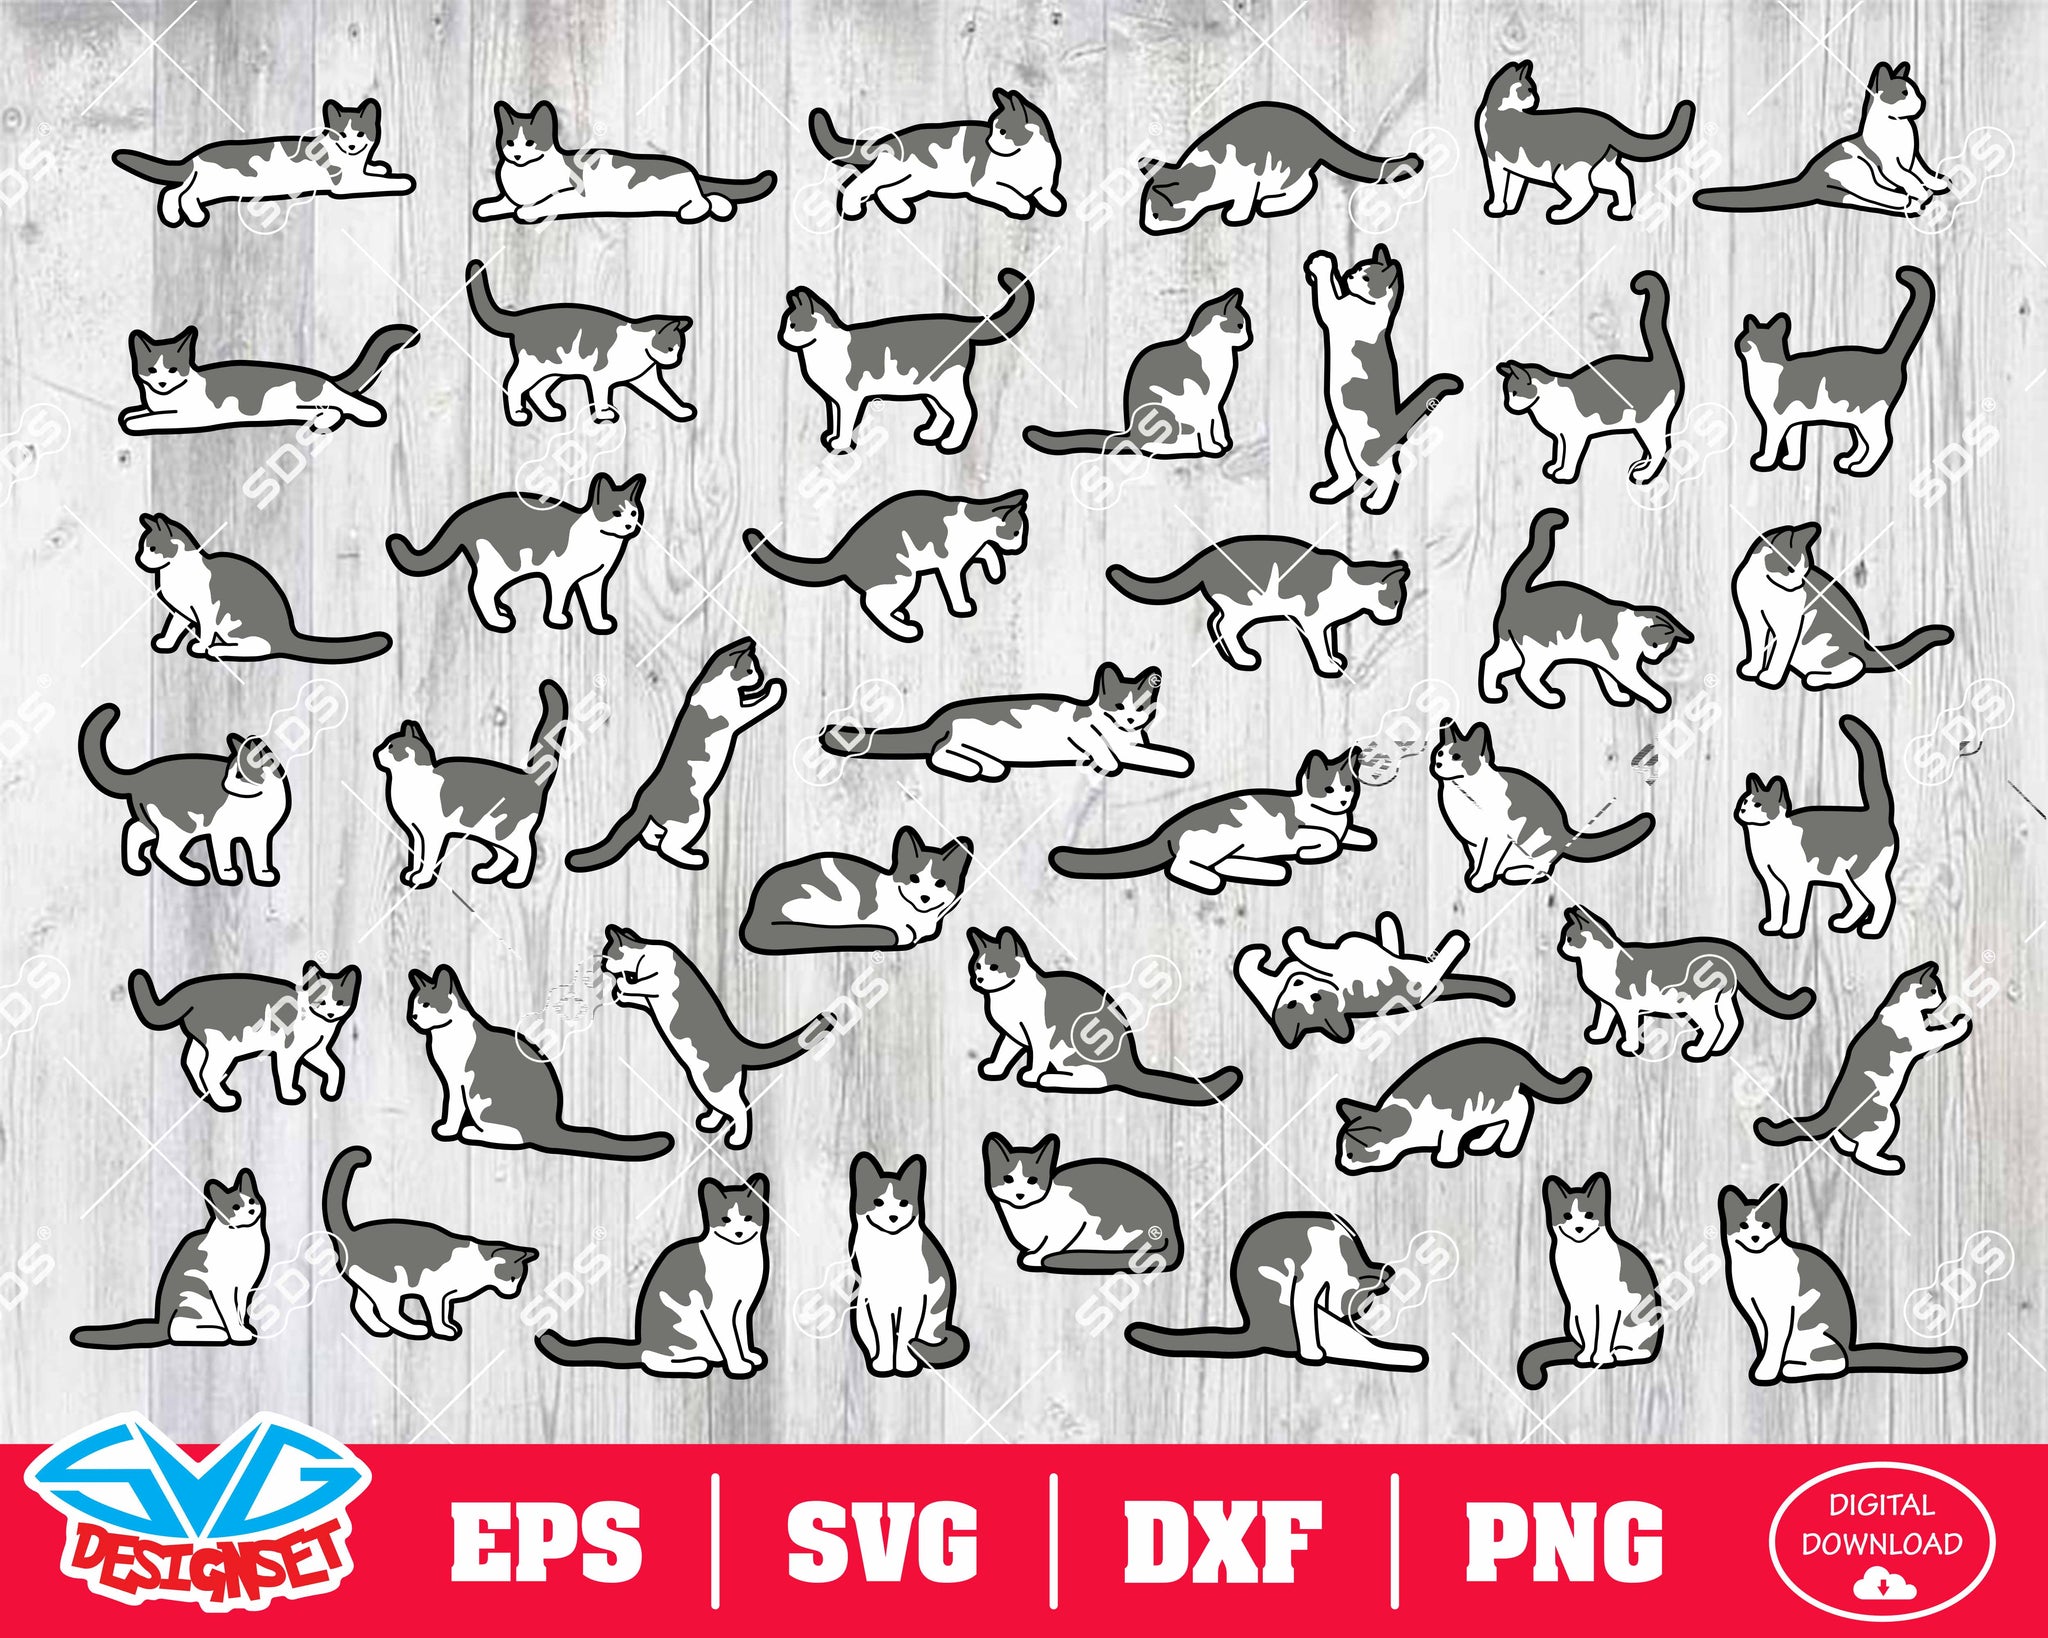 Cat Svg, Dxf, Eps, Png, Clipart, Silhouette and Cutfiles #3 - SVGDesignSets